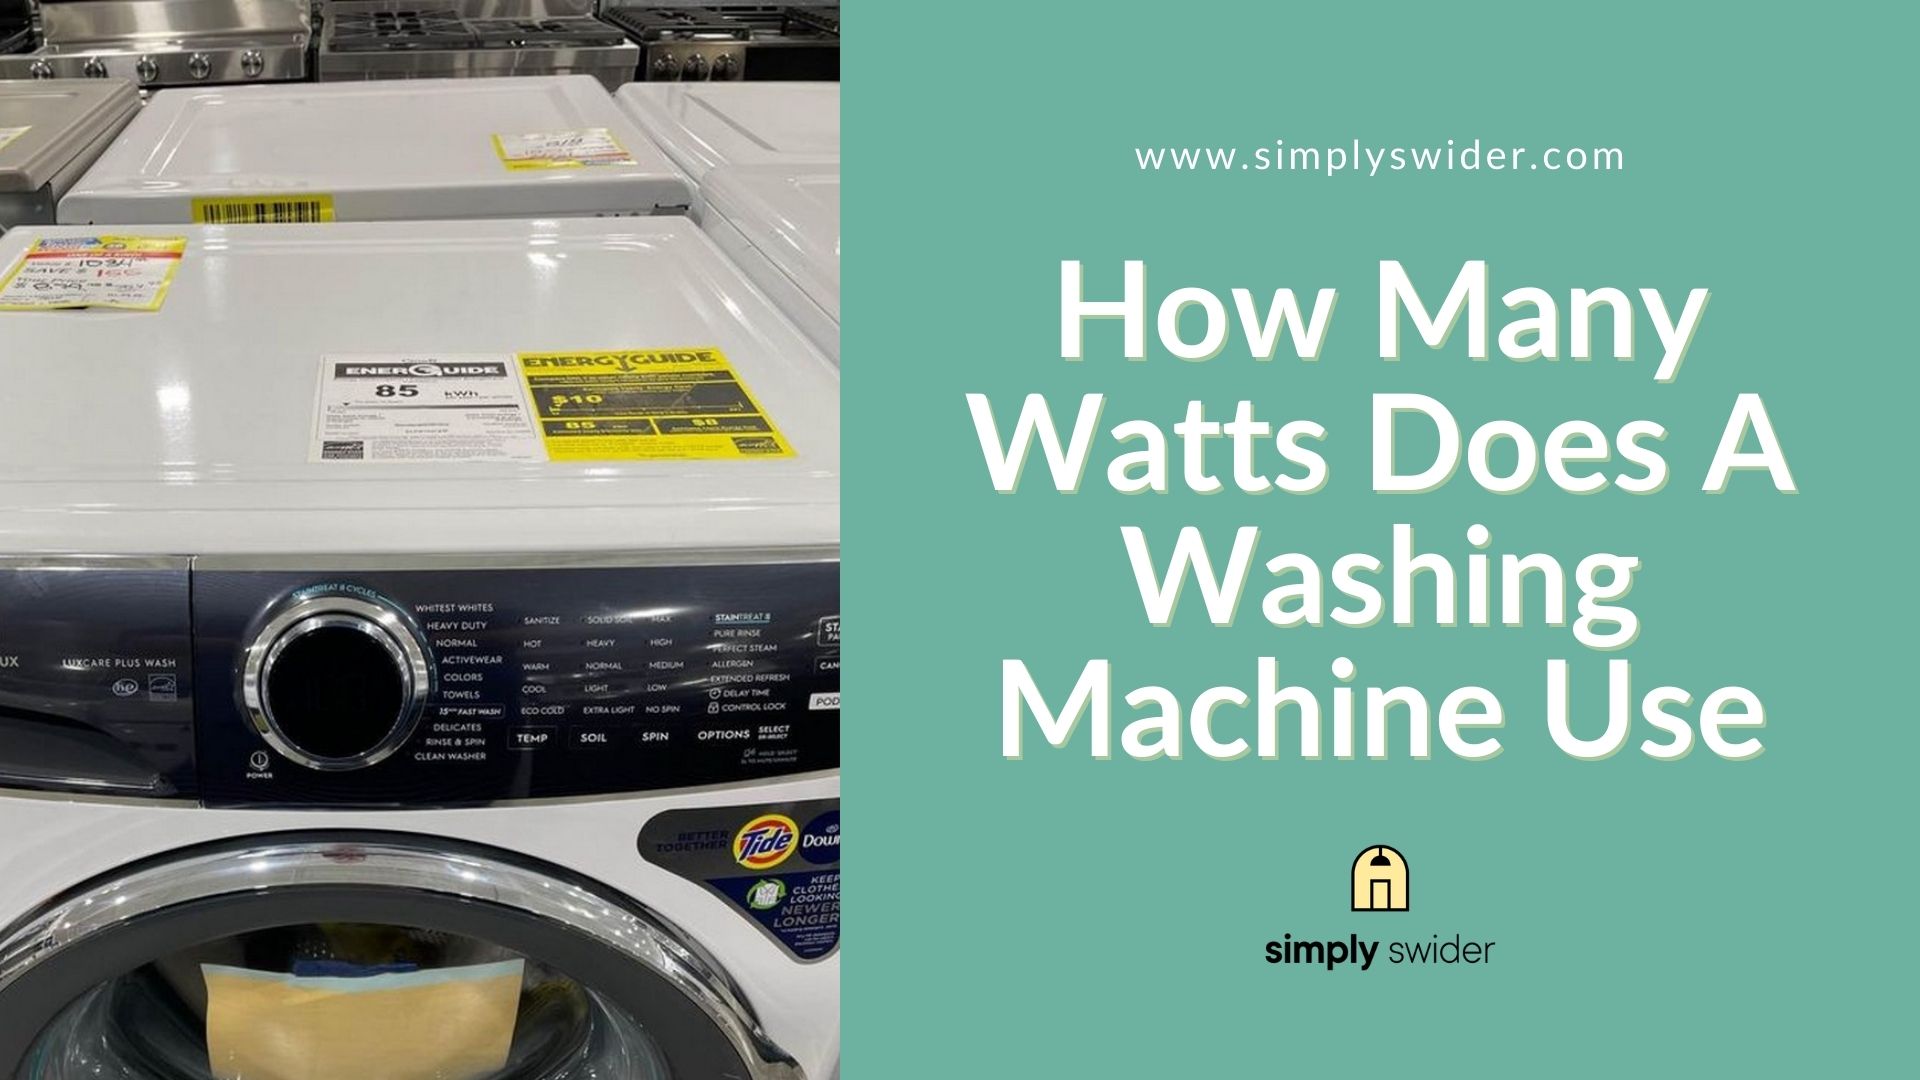 How Many Watts Does A Washing Machine Use